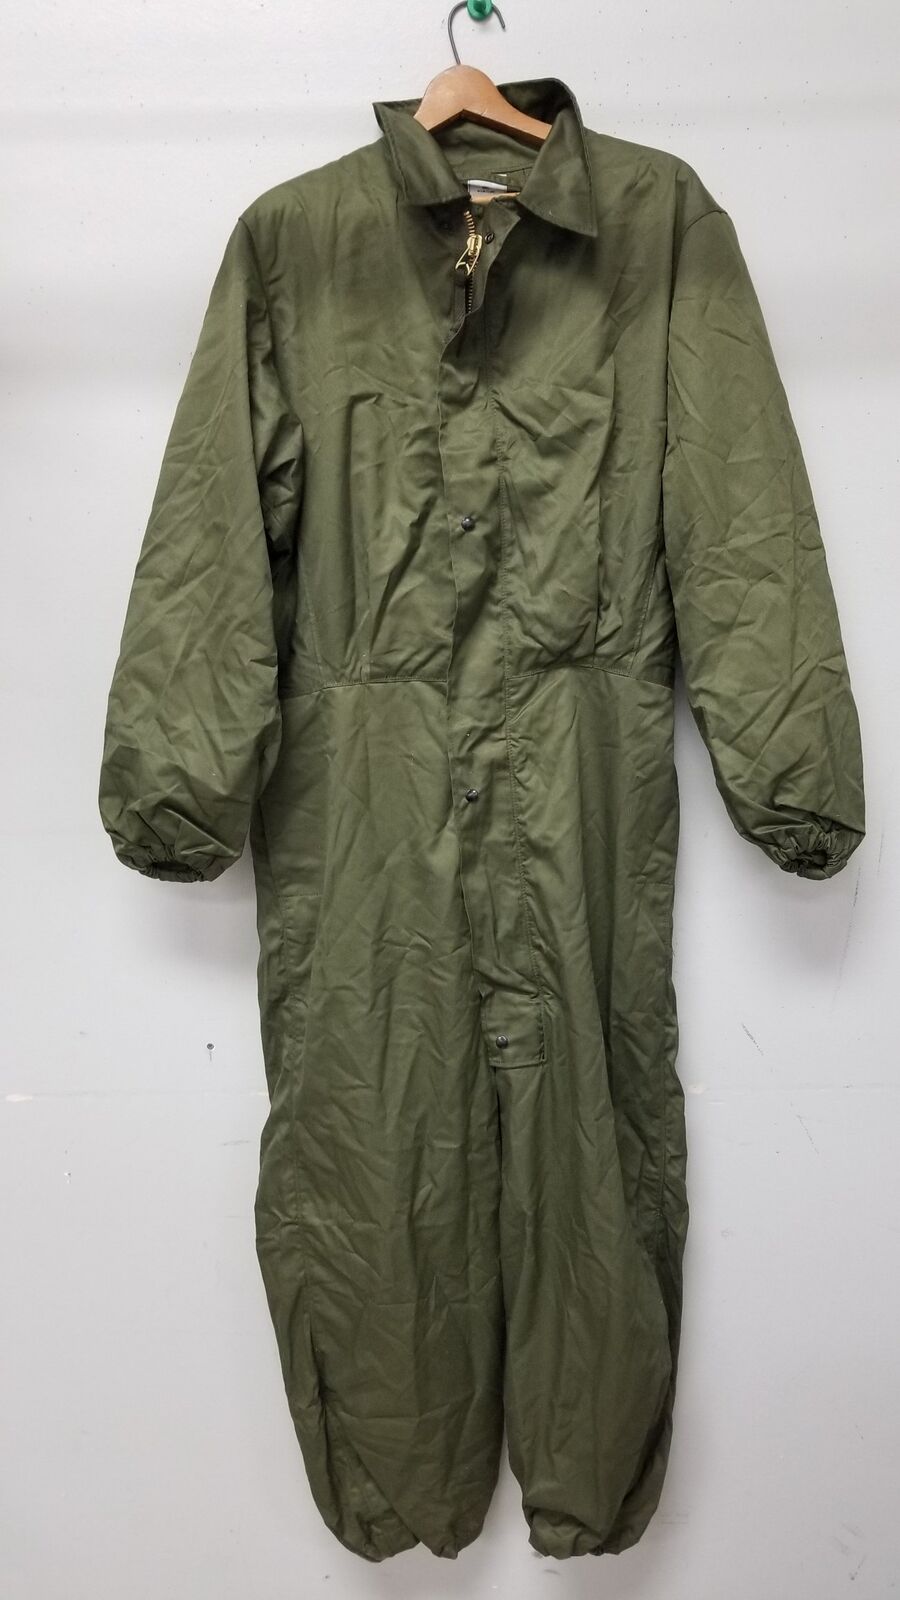 Vintage Men\'s U.S. Military Mechanic\'s Cold Weather Coveralls - Size Small